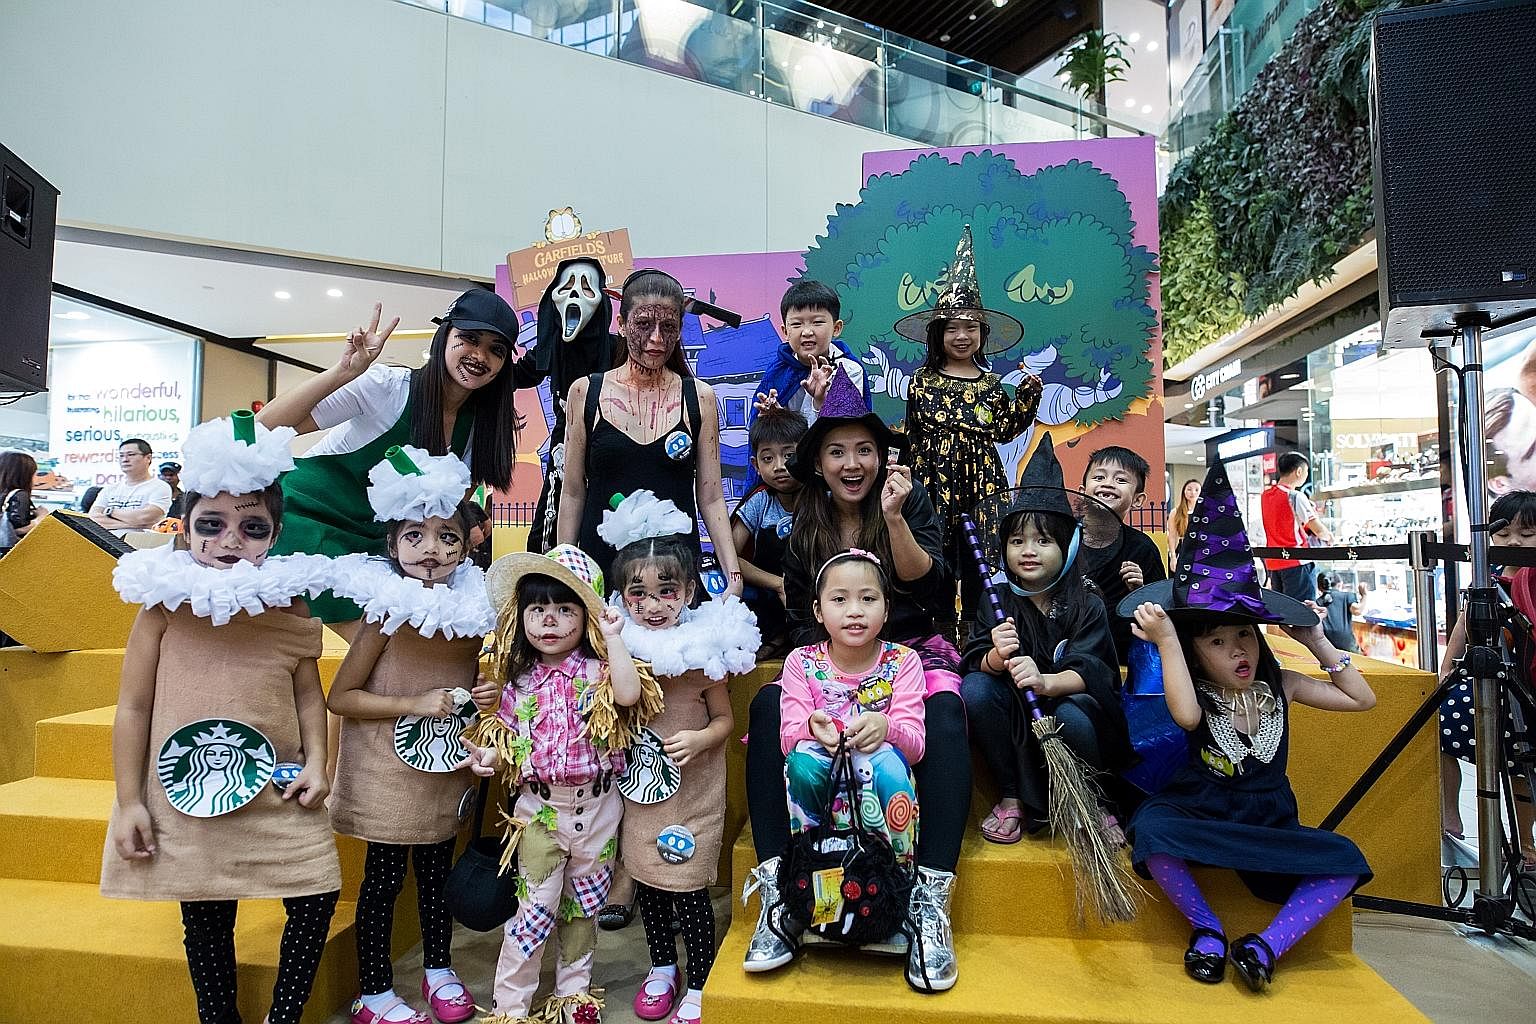 The finalists of last year's Halloween costume event at The Seletar Mall. Participants of last year's Singapore Halloween Festival run.